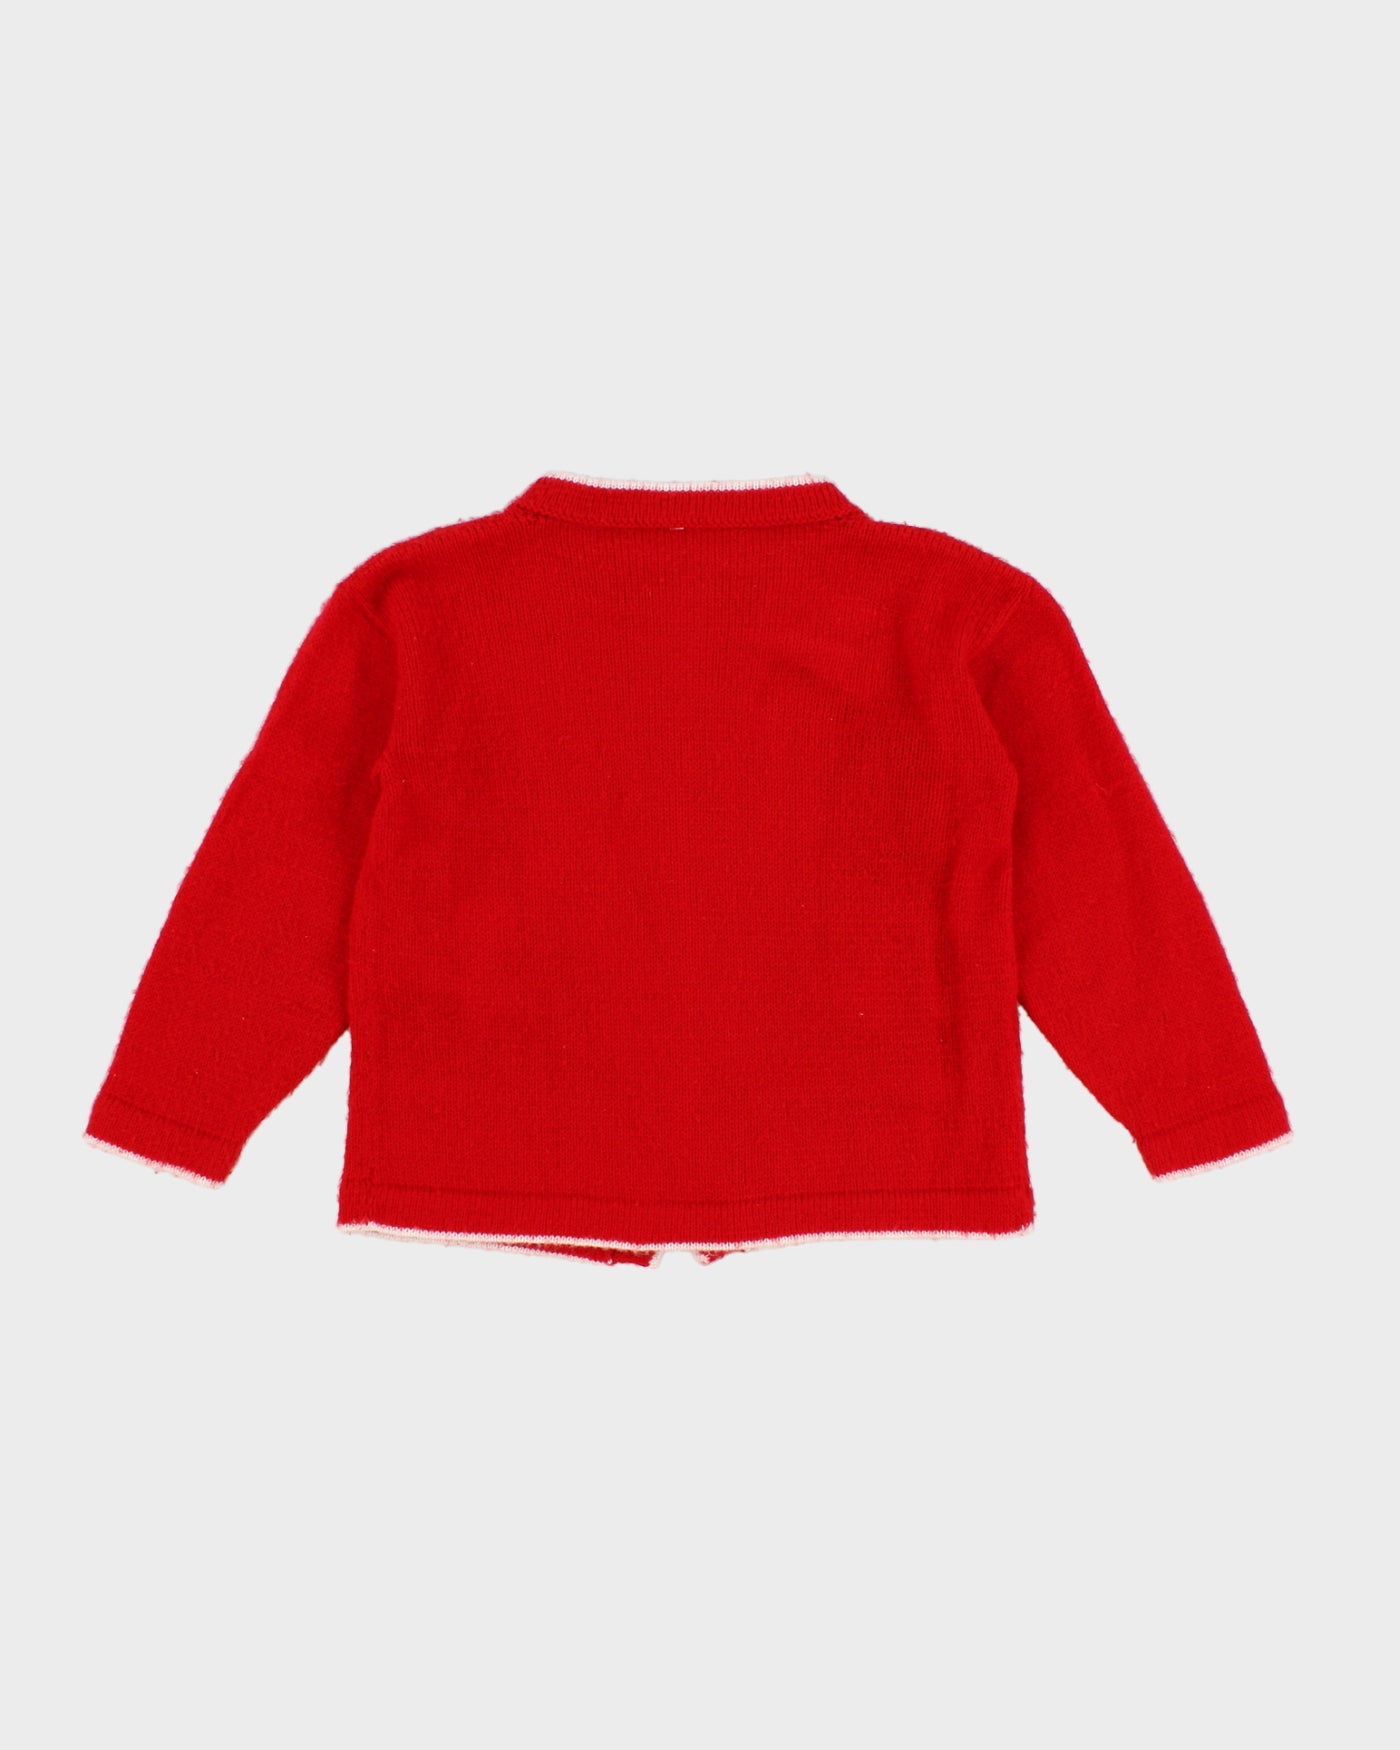 Vintage Childrens Red Knitted Cardigan